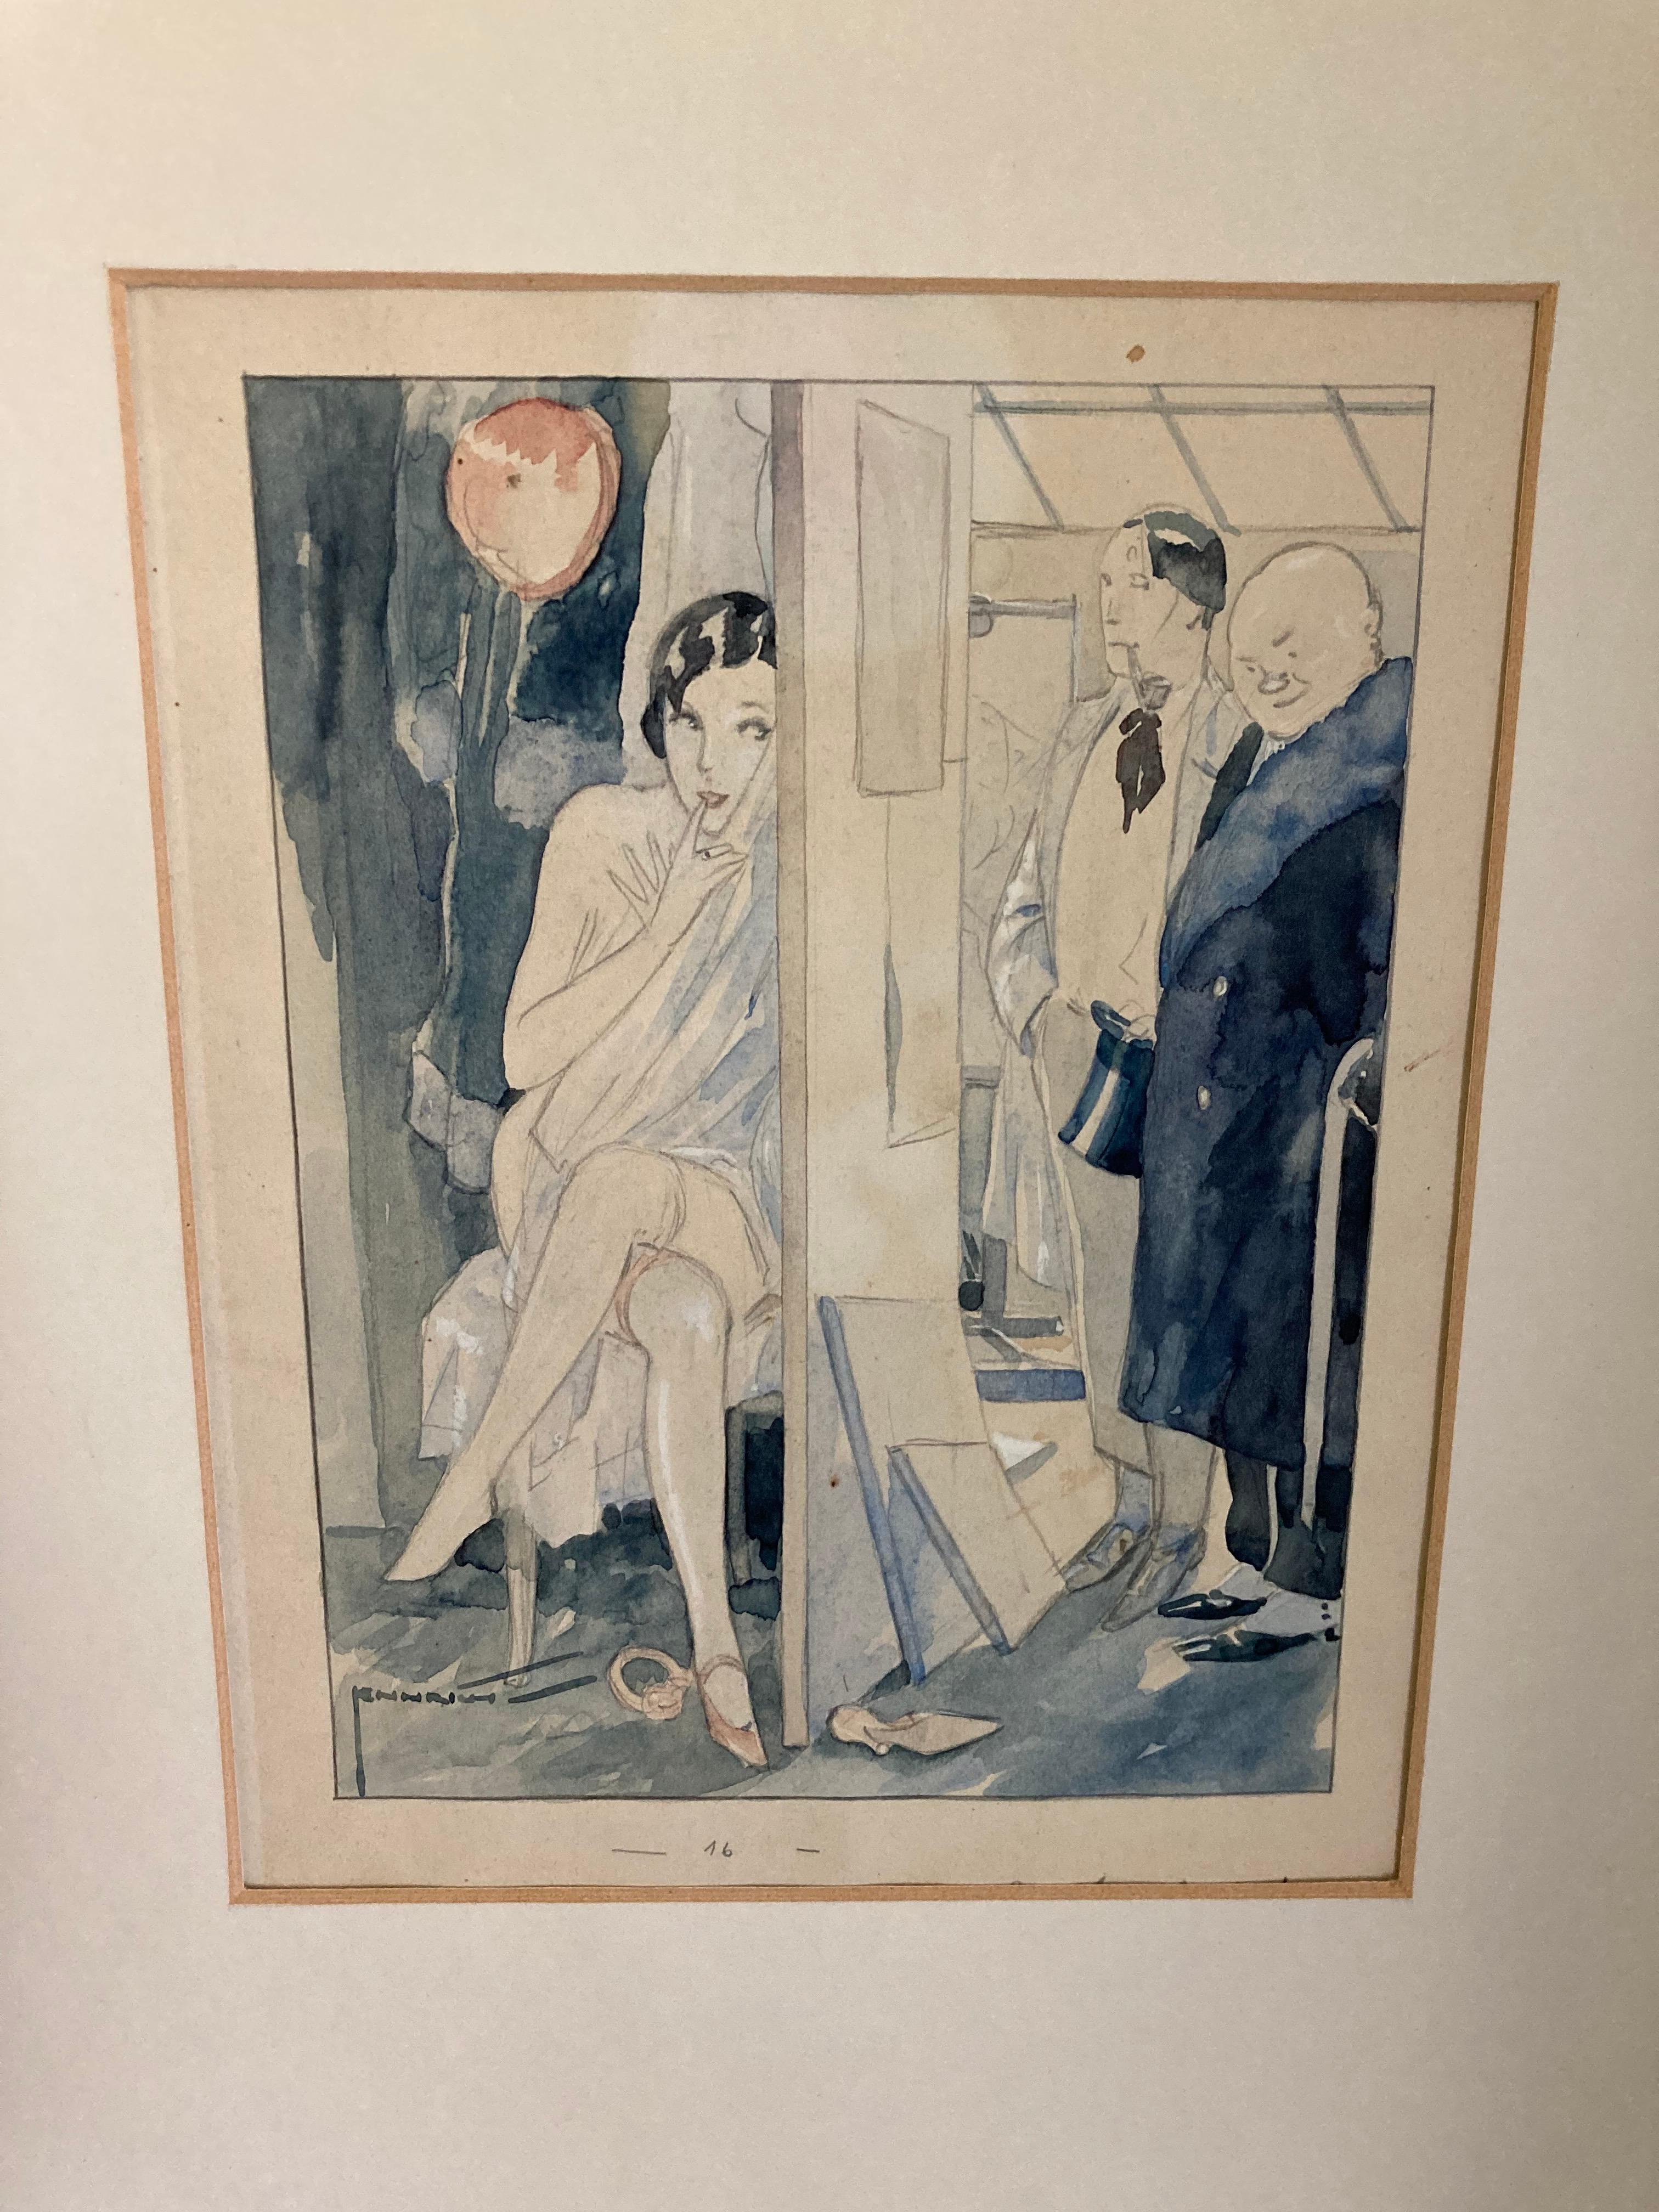 1 Set of five Original Art Déco watercolor drawings. 1920s.  Willi Jennrich (1901-1944) Germany.
These works are very rare and decorative. They are Original watercolors. Typical subjects of the 1920s .
The drawings were probably design sketches for